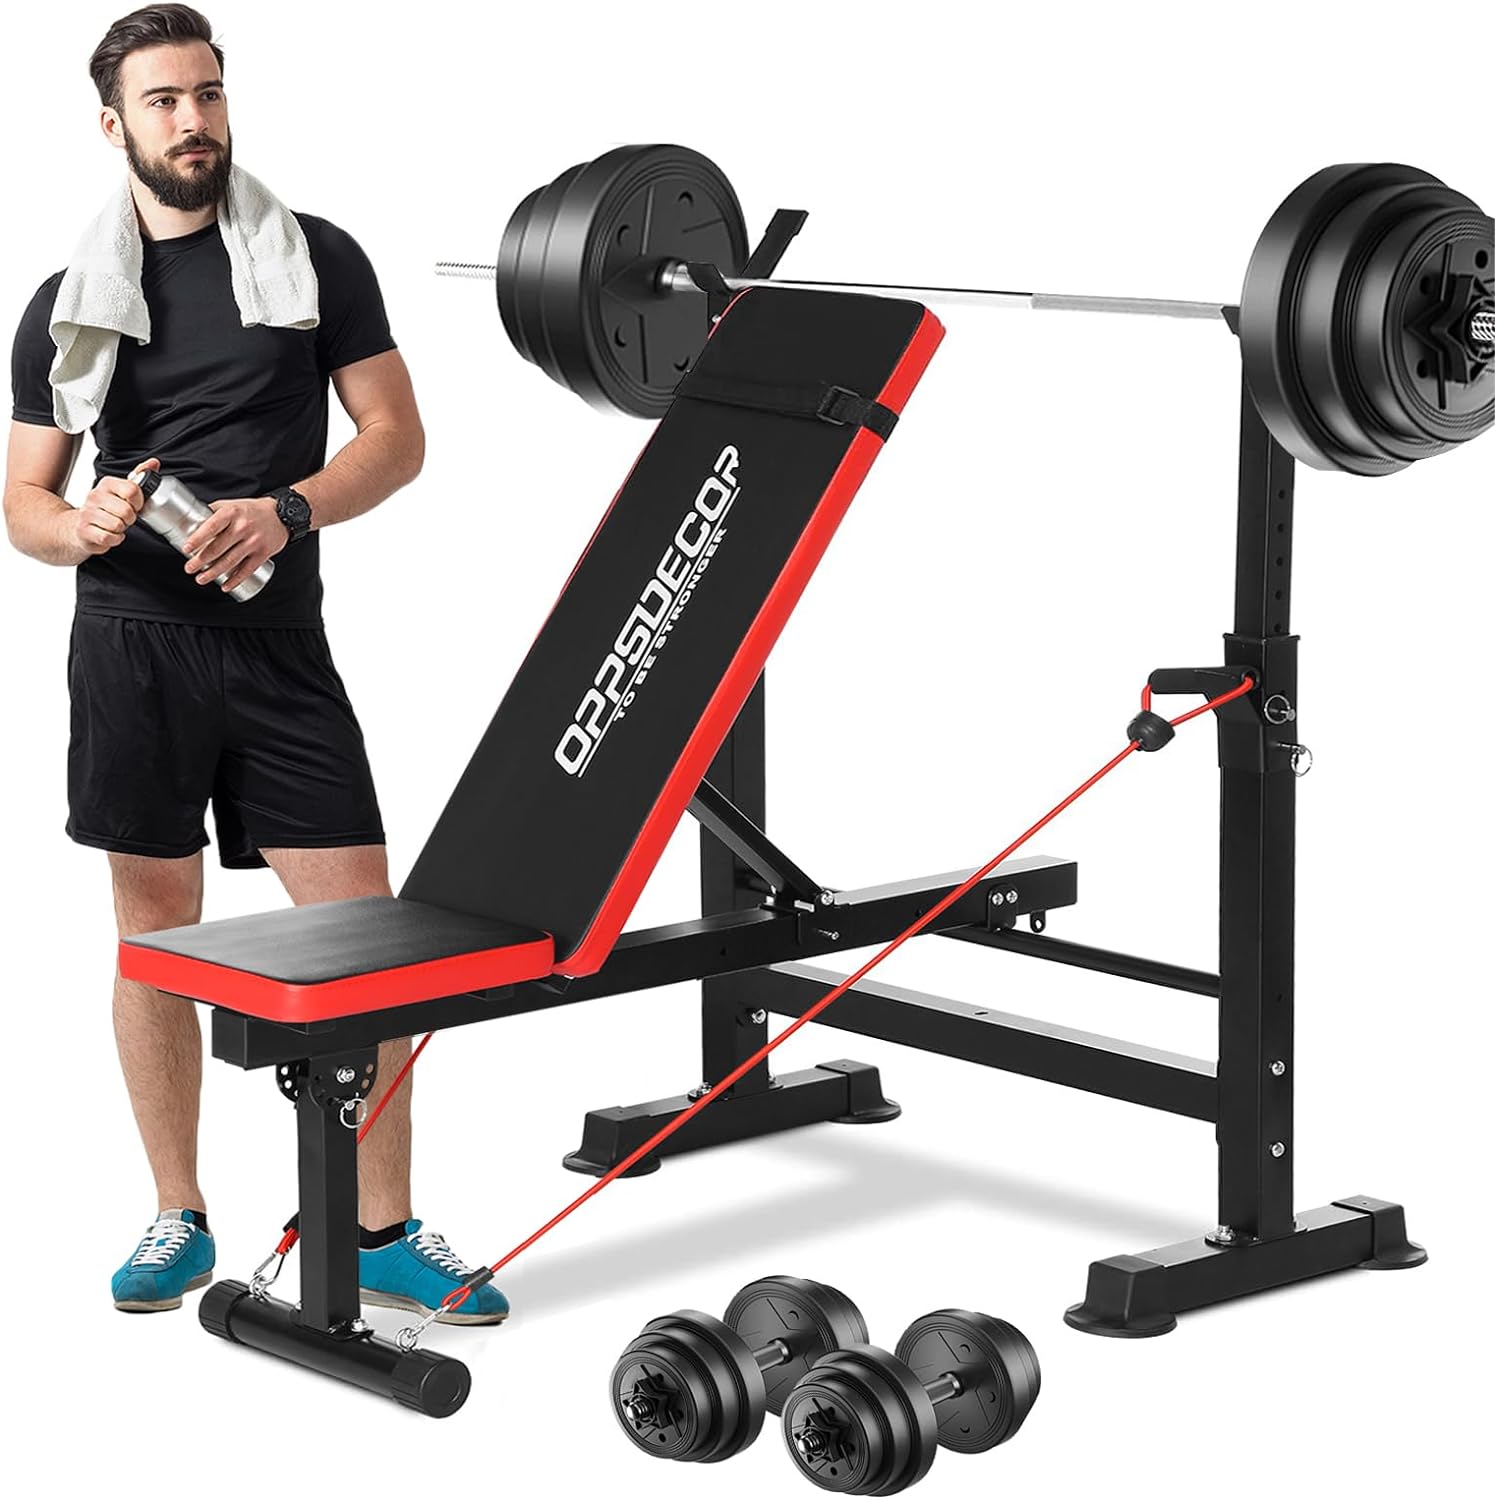 OPPSDECOR 6 in 1 600lbs Weight Bench Set with Squat Rack $95.99